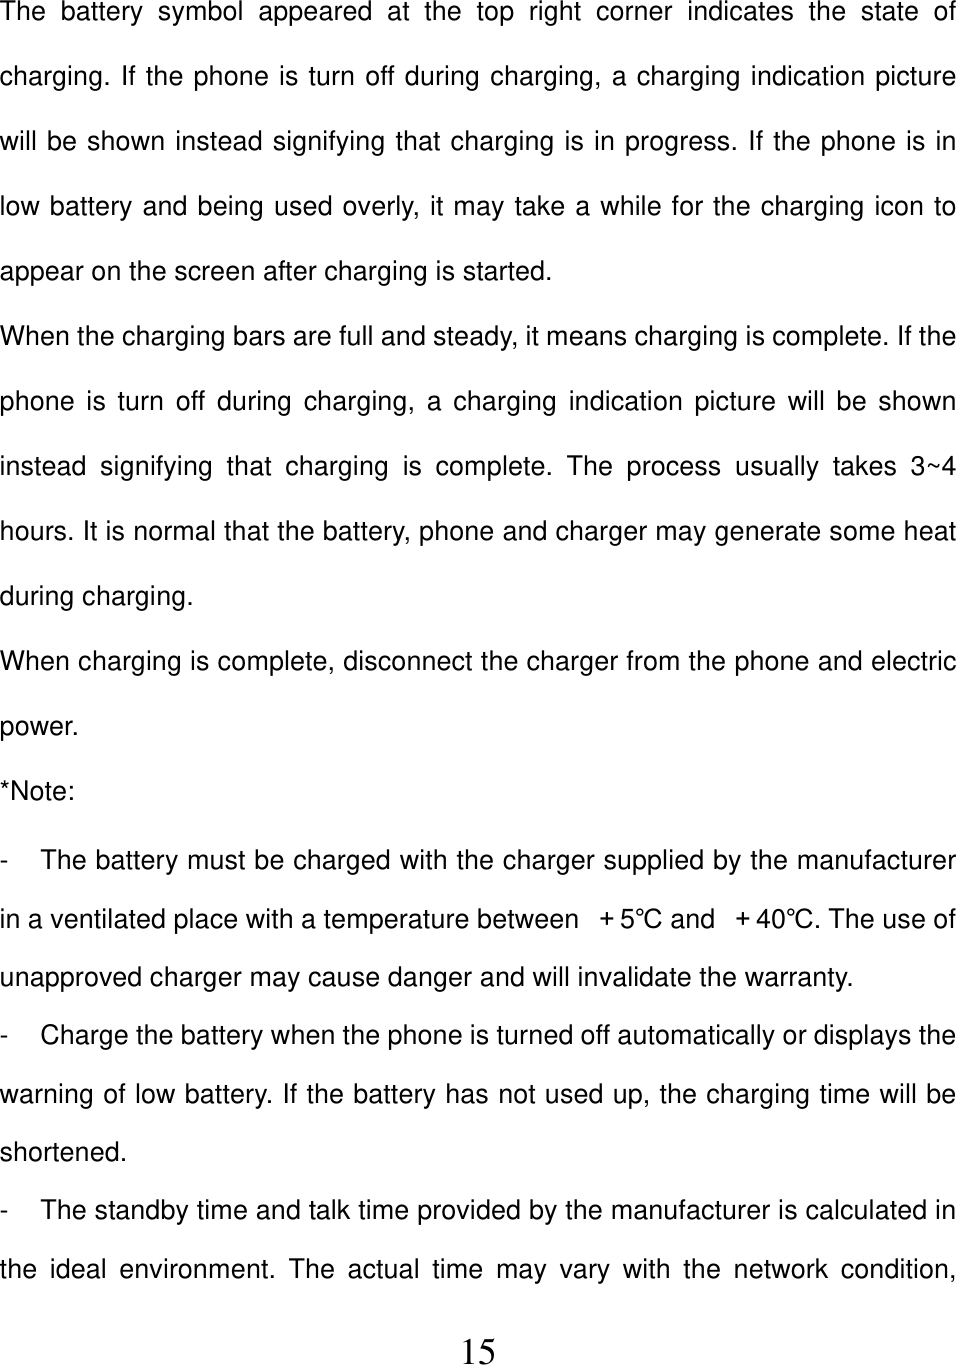  15The battery symbol appeared at the top right corner indicates the state of charging. If the phone is turn off during charging, a charging indication picture will be shown instead signifying that charging is in progress. If the phone is in low battery and being used overly, it may take a while for the charging icon to appear on the screen after charging is started. When the charging bars are full and steady, it means charging is complete. If the phone is turn off during charging, a charging indication picture will be shown instead signifying that charging is complete. The process usually takes 3~4 hours. It is normal that the battery, phone and charger may generate some heat during charging. When charging is complete, disconnect the charger from the phone and electric power. *Note: -  The battery must be charged with the charger supplied by the manufacturer in a ventilated place with a temperature between  ＋5℃ and  ＋40℃. The use of unapproved charger may cause danger and will invalidate the warranty. -  Charge the battery when the phone is turned off automatically or displays the warning of low battery. If the battery has not used up, the charging time will be shortened. -  The standby time and talk time provided by the manufacturer is calculated in the ideal environment. The actual time may vary with the network condition, 